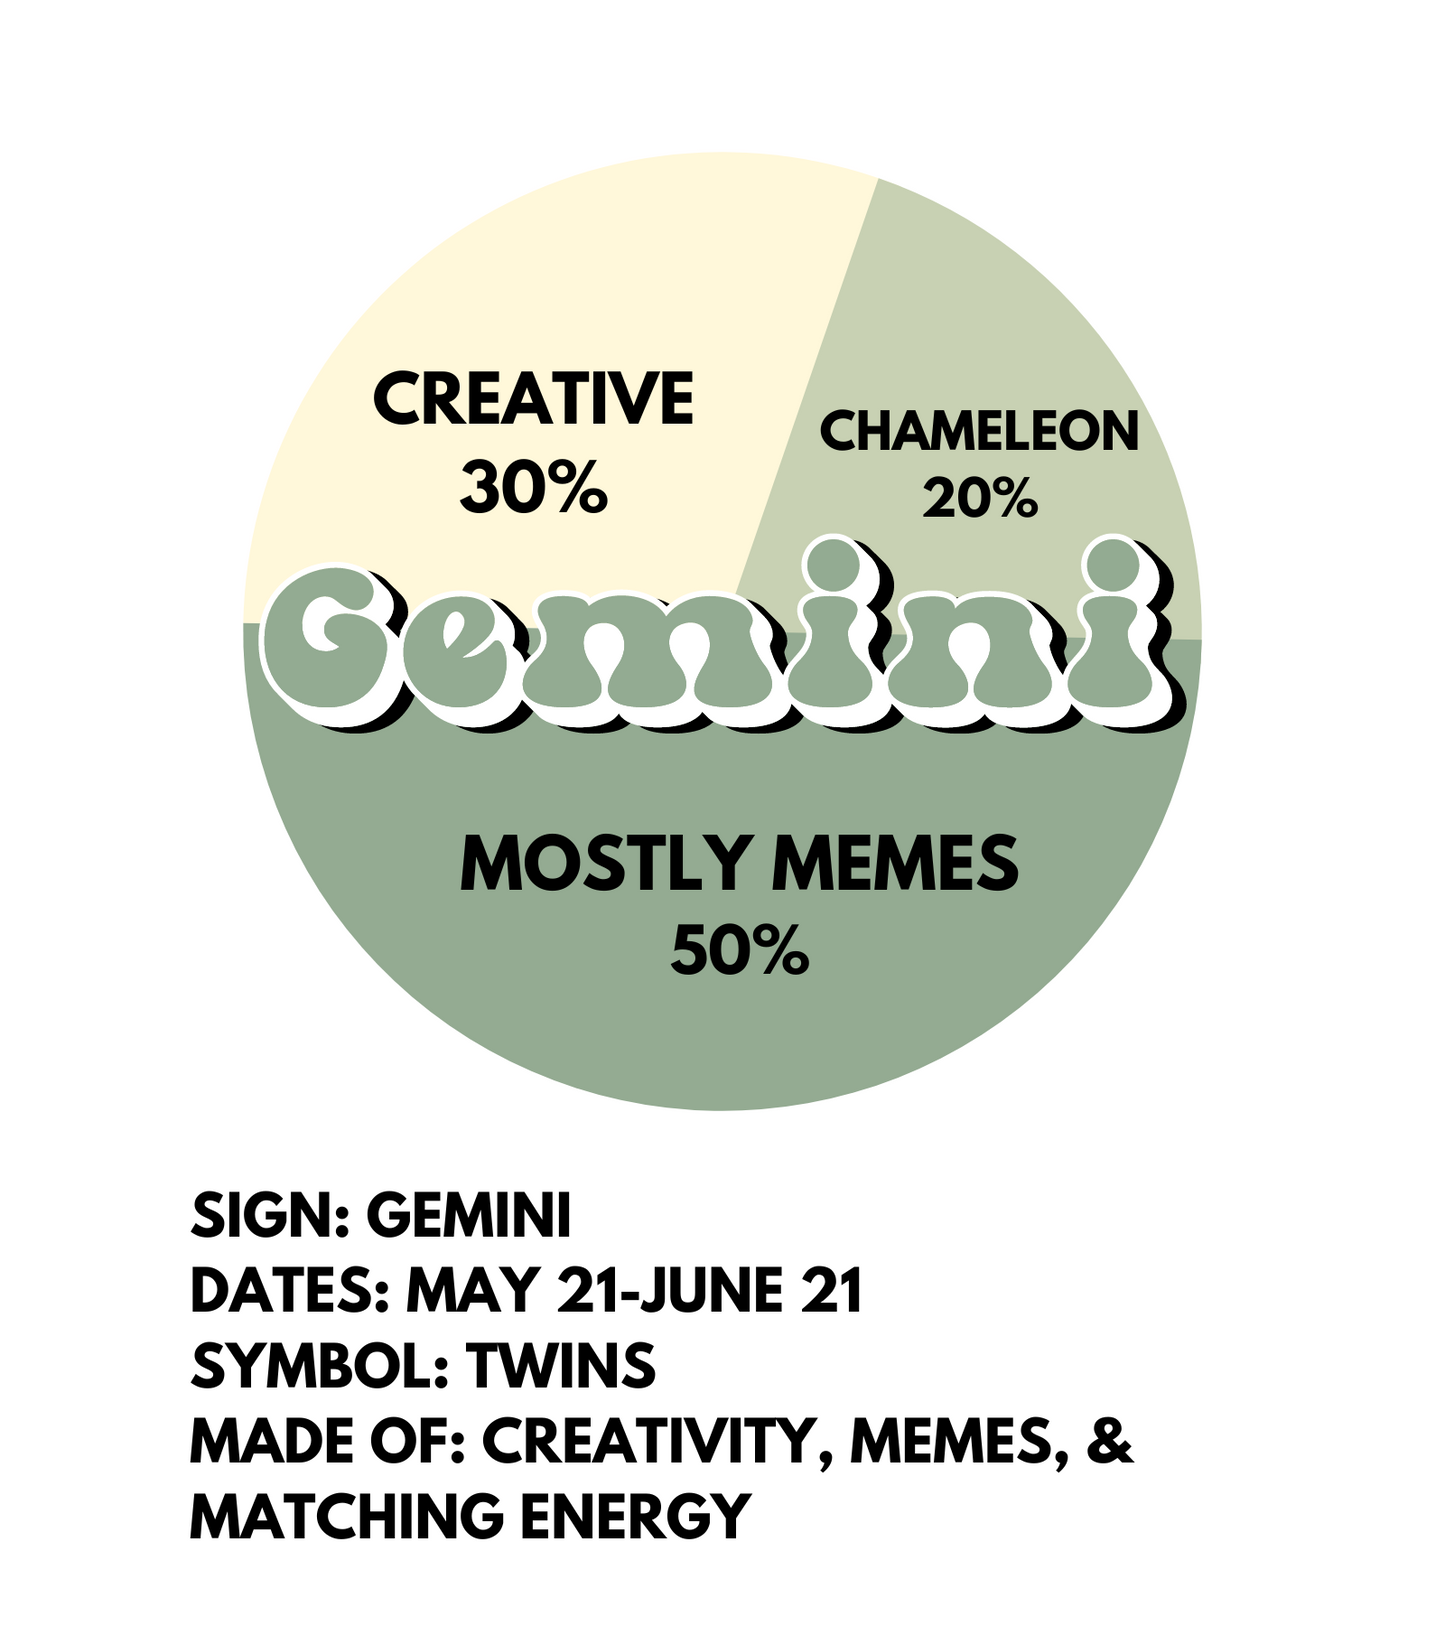 A circular sticker design of a pie chart, with the word Gemini in the middle. The pie chart is broken up into 3 sections: 50% mostly memes, 30% creative, 20% cameleon. Underneath the design there is the text: SIGN: GEMINI DATES: MAY 21-JUNE 21 SYMBOL: TWINS MADE OF: CREATIVITY, MEMES, & MATCHING ENERGY